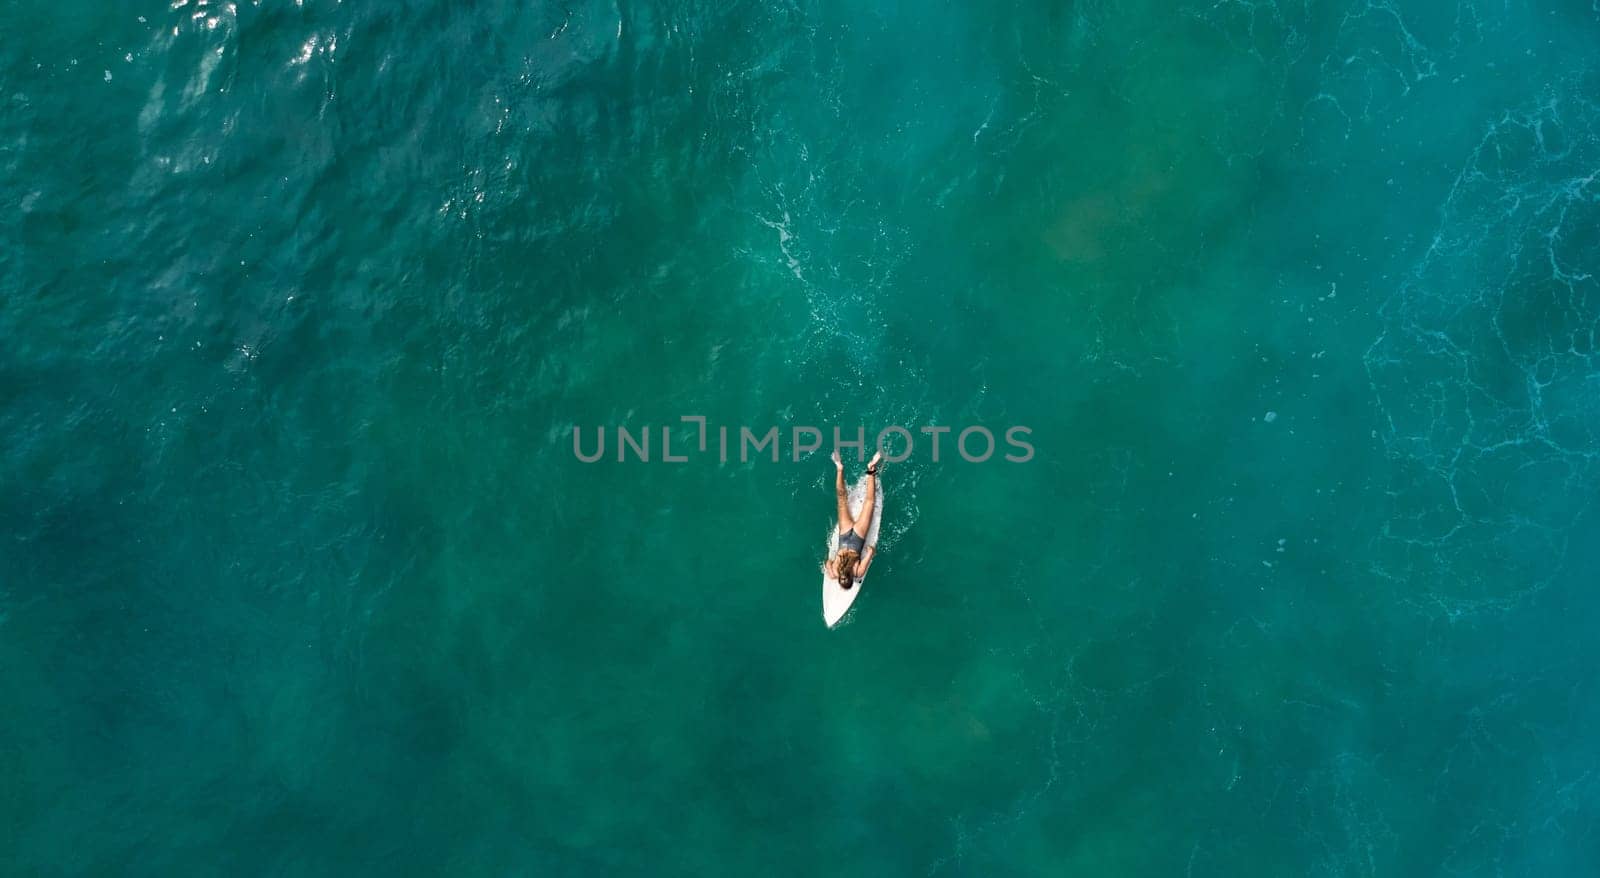 Aerial view of the ocean and surfer girl. by driver-s